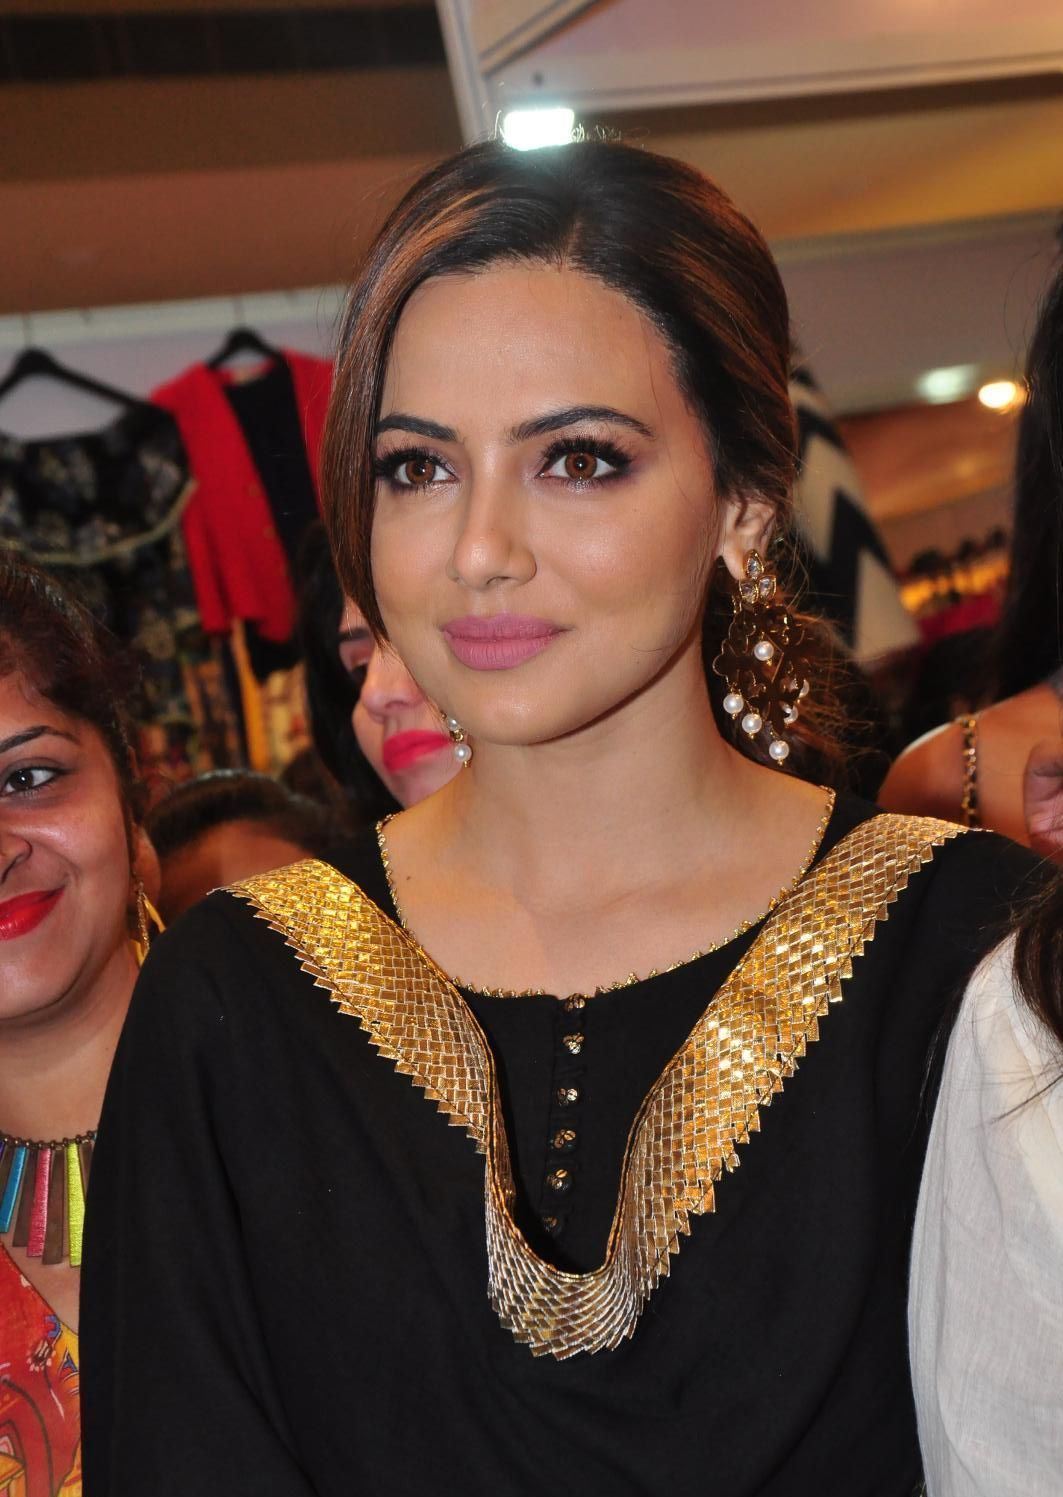 Sana Khan Looks Gorgeous In Black Dress At The Akritti ELITE Exhibitions In Hyderabad